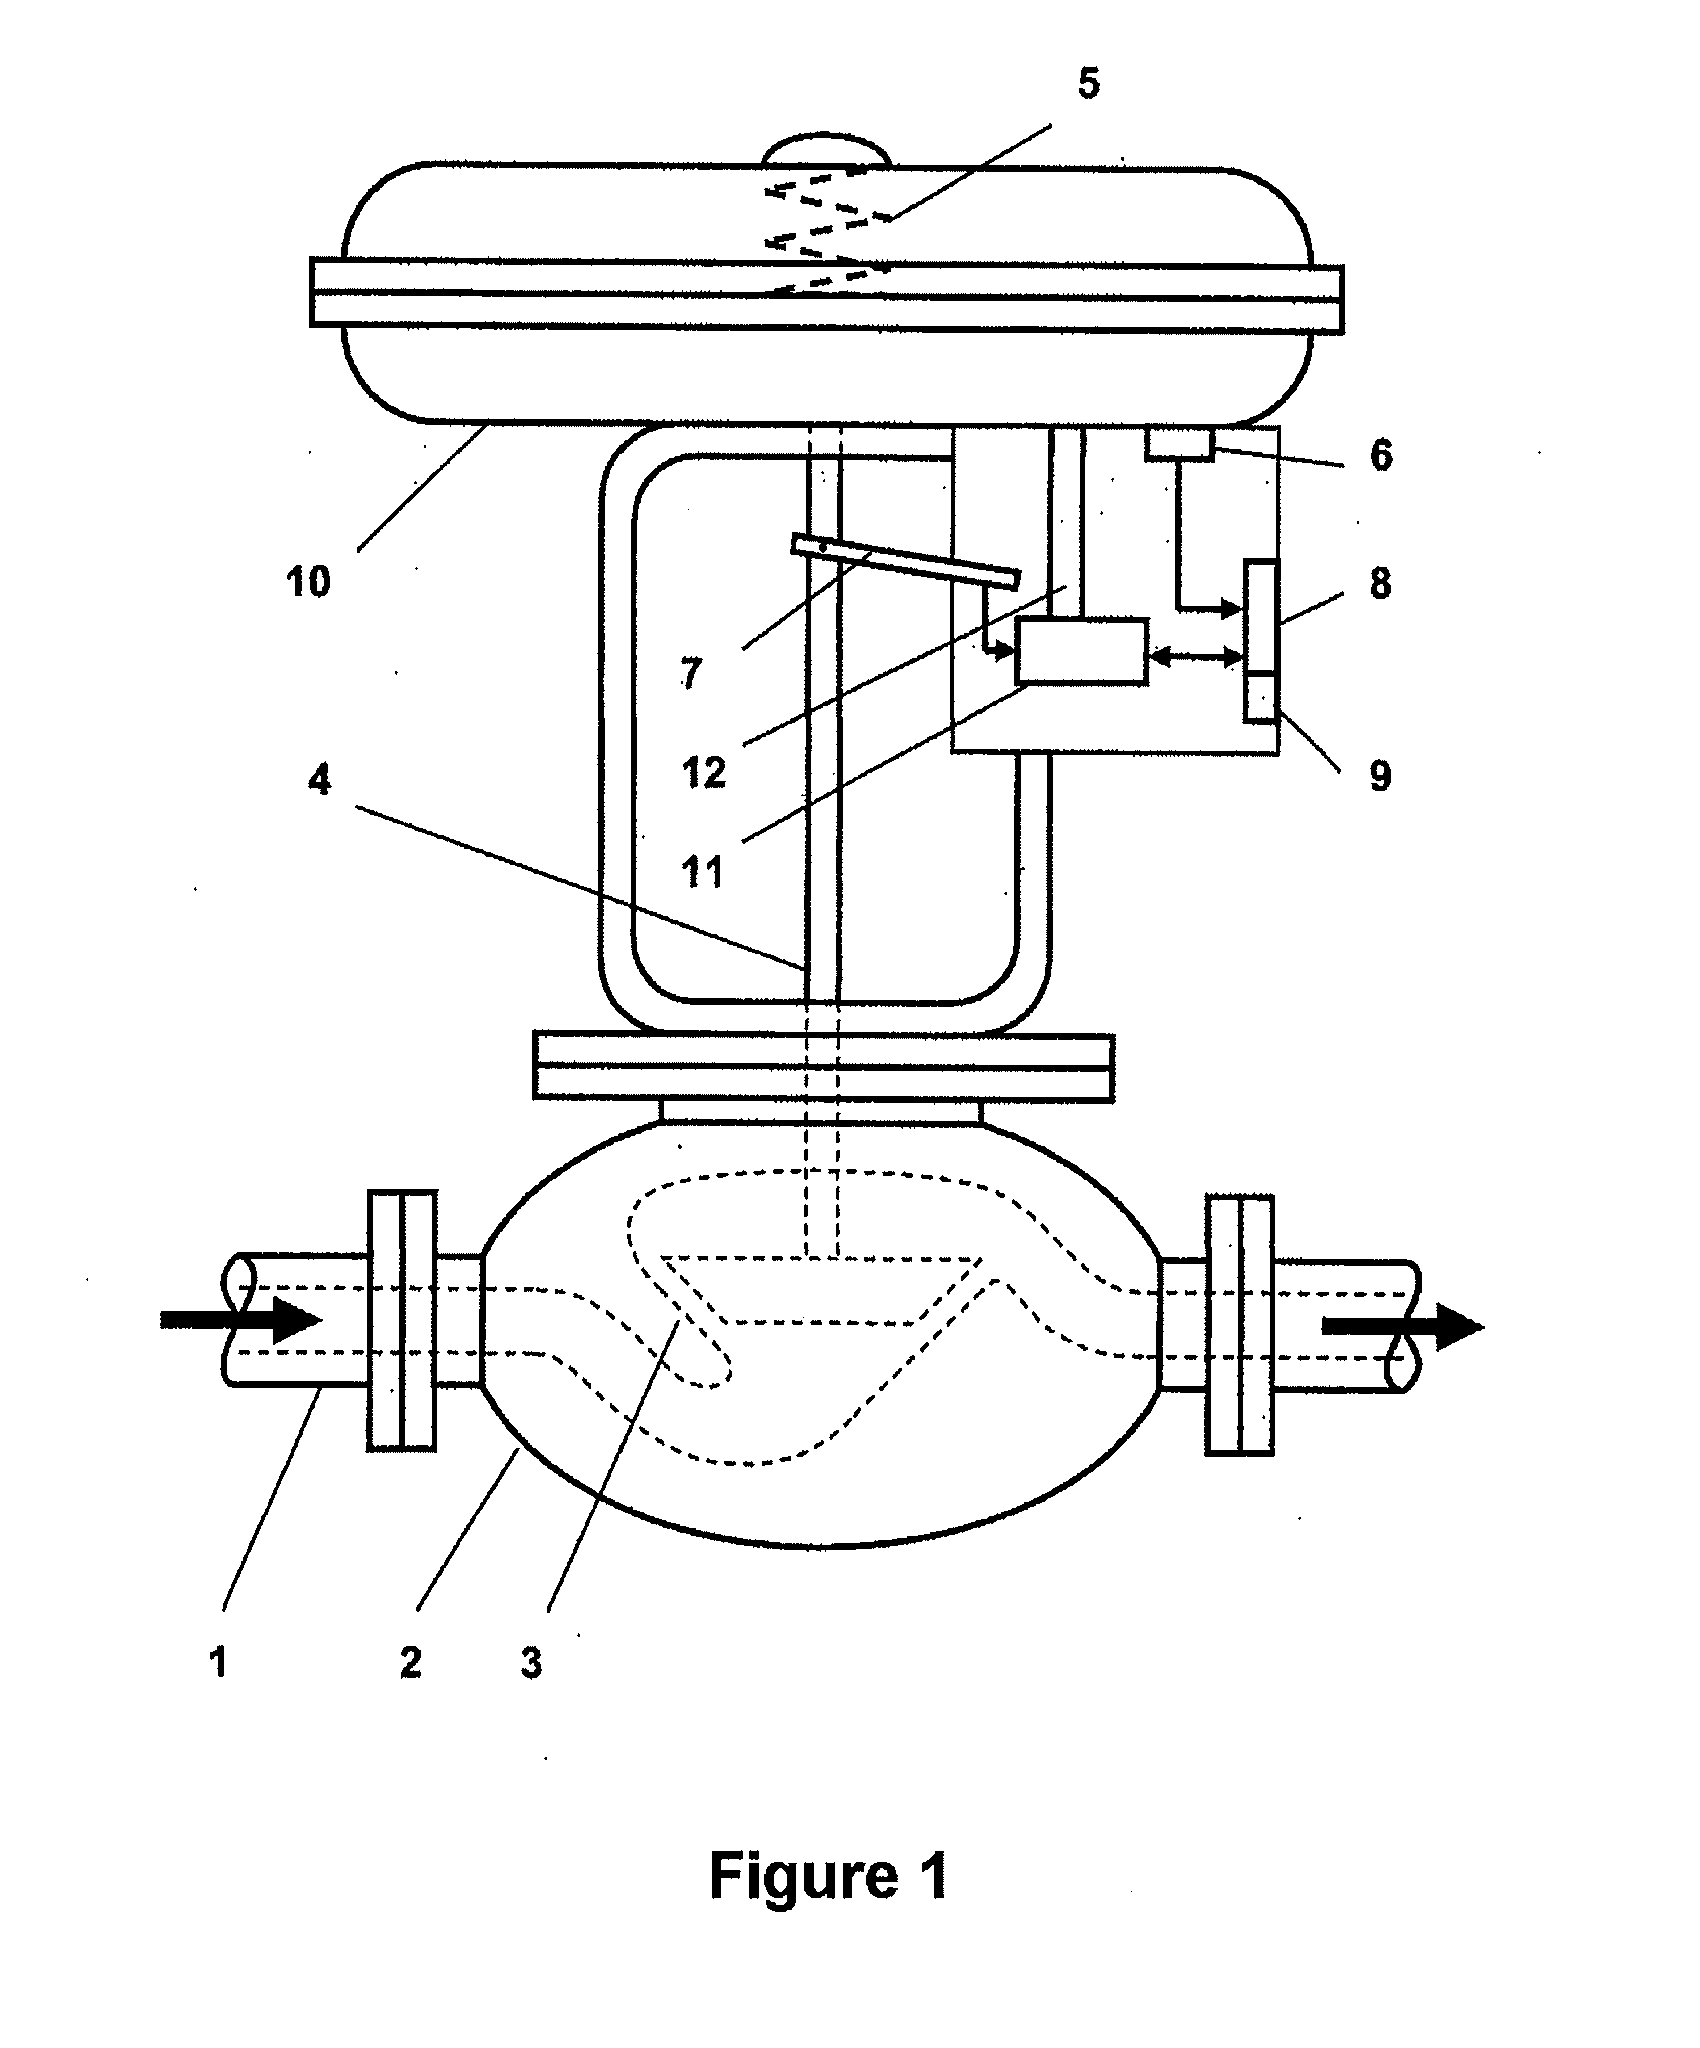 Method for determining the path and pressure wear condition of a valve mechanism and valve arrangement using such a valve